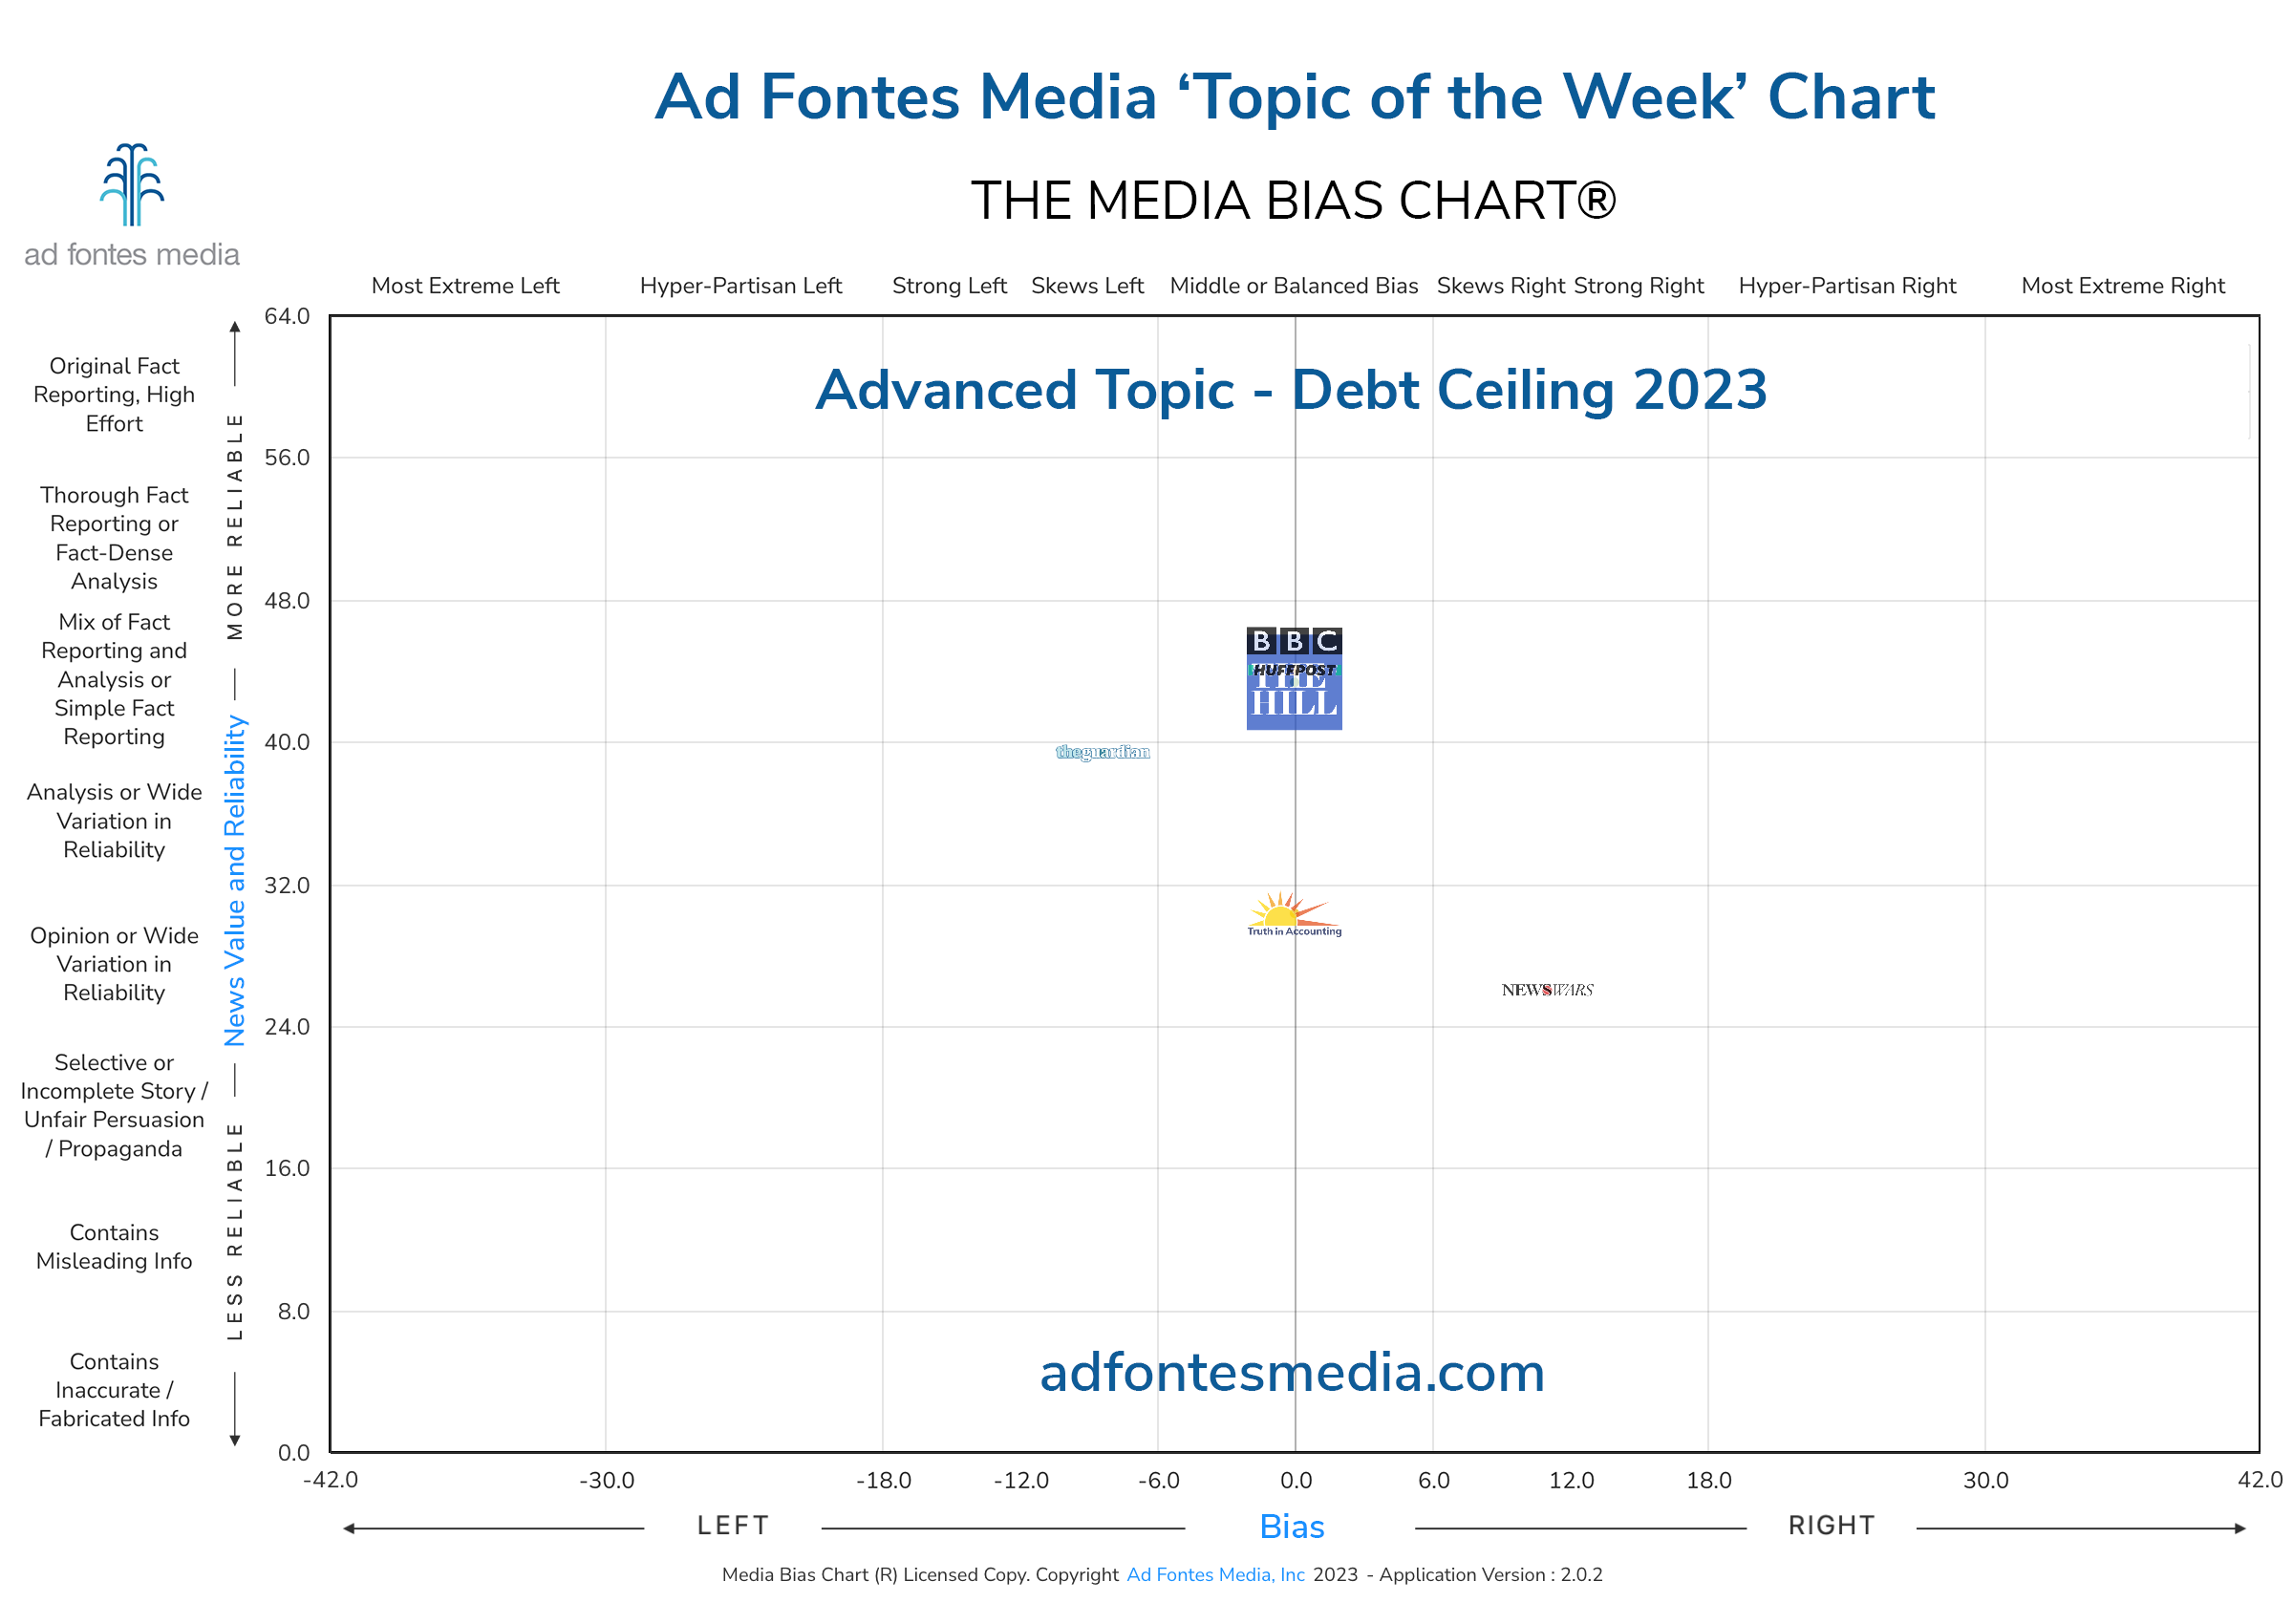 Scores of the Debt Ceiling 2023 articles on the chart